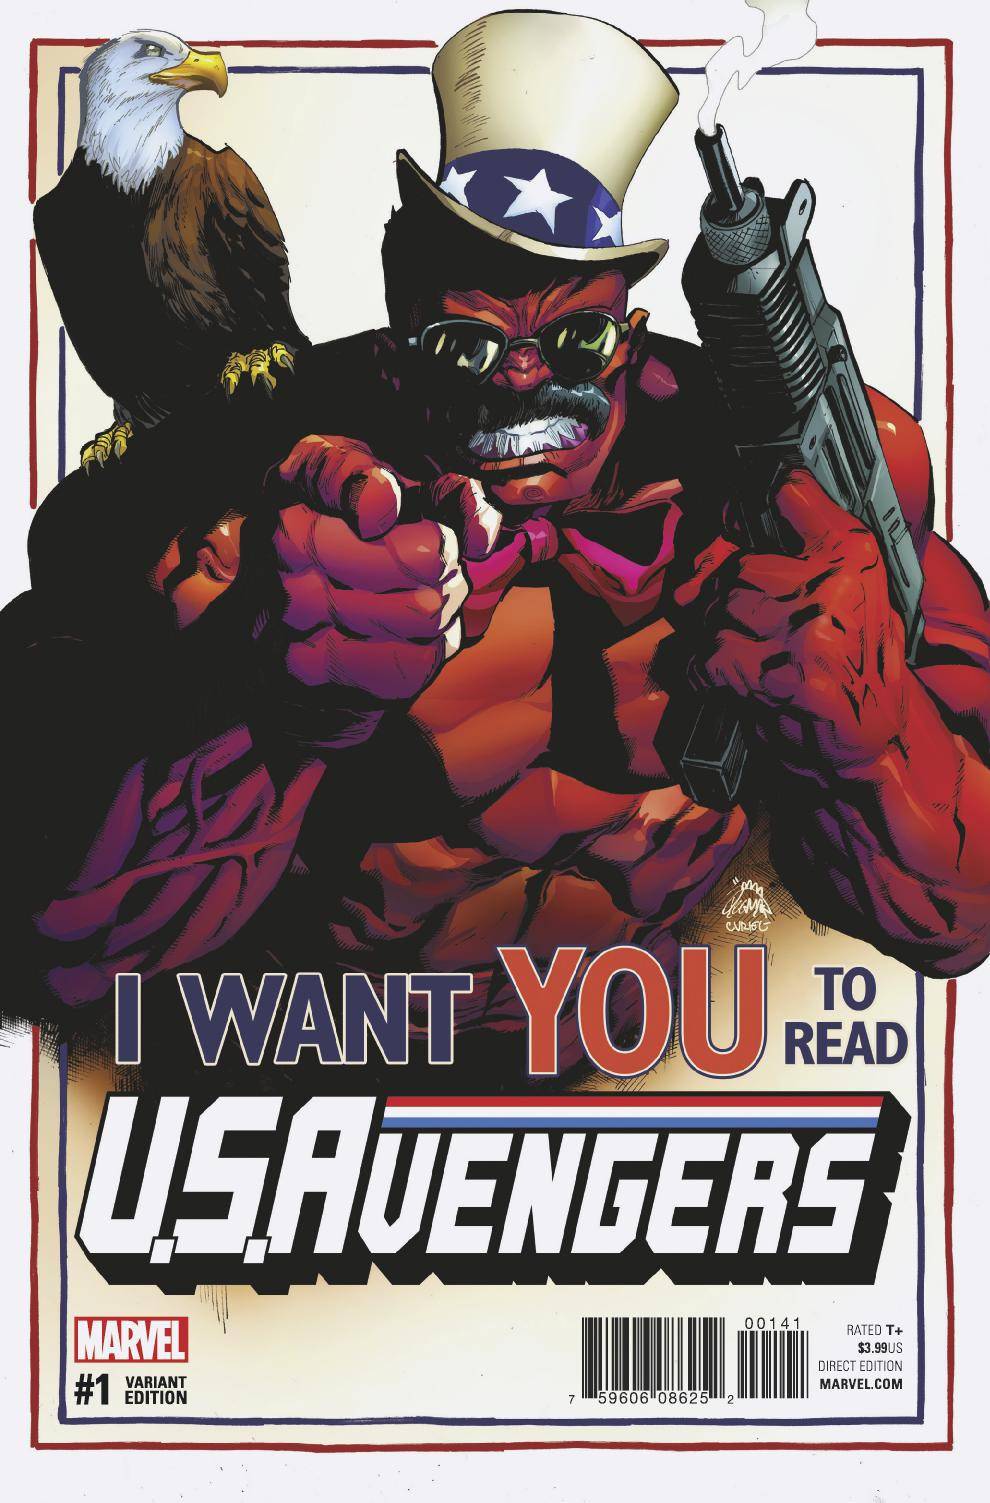 US Avengers #1 1 for 25 Incentive Ryan Stegman